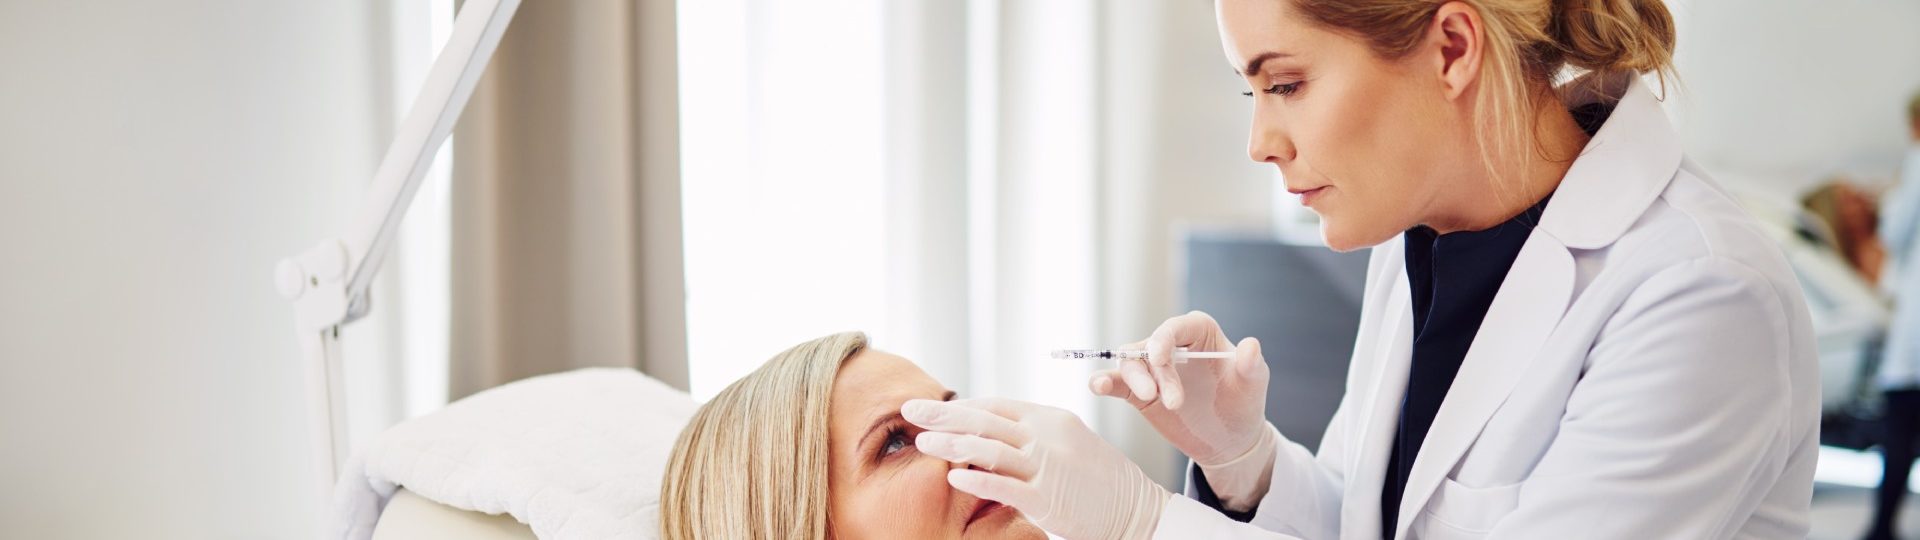 What Sets an Experienced Botox Injector Apart from the Rest